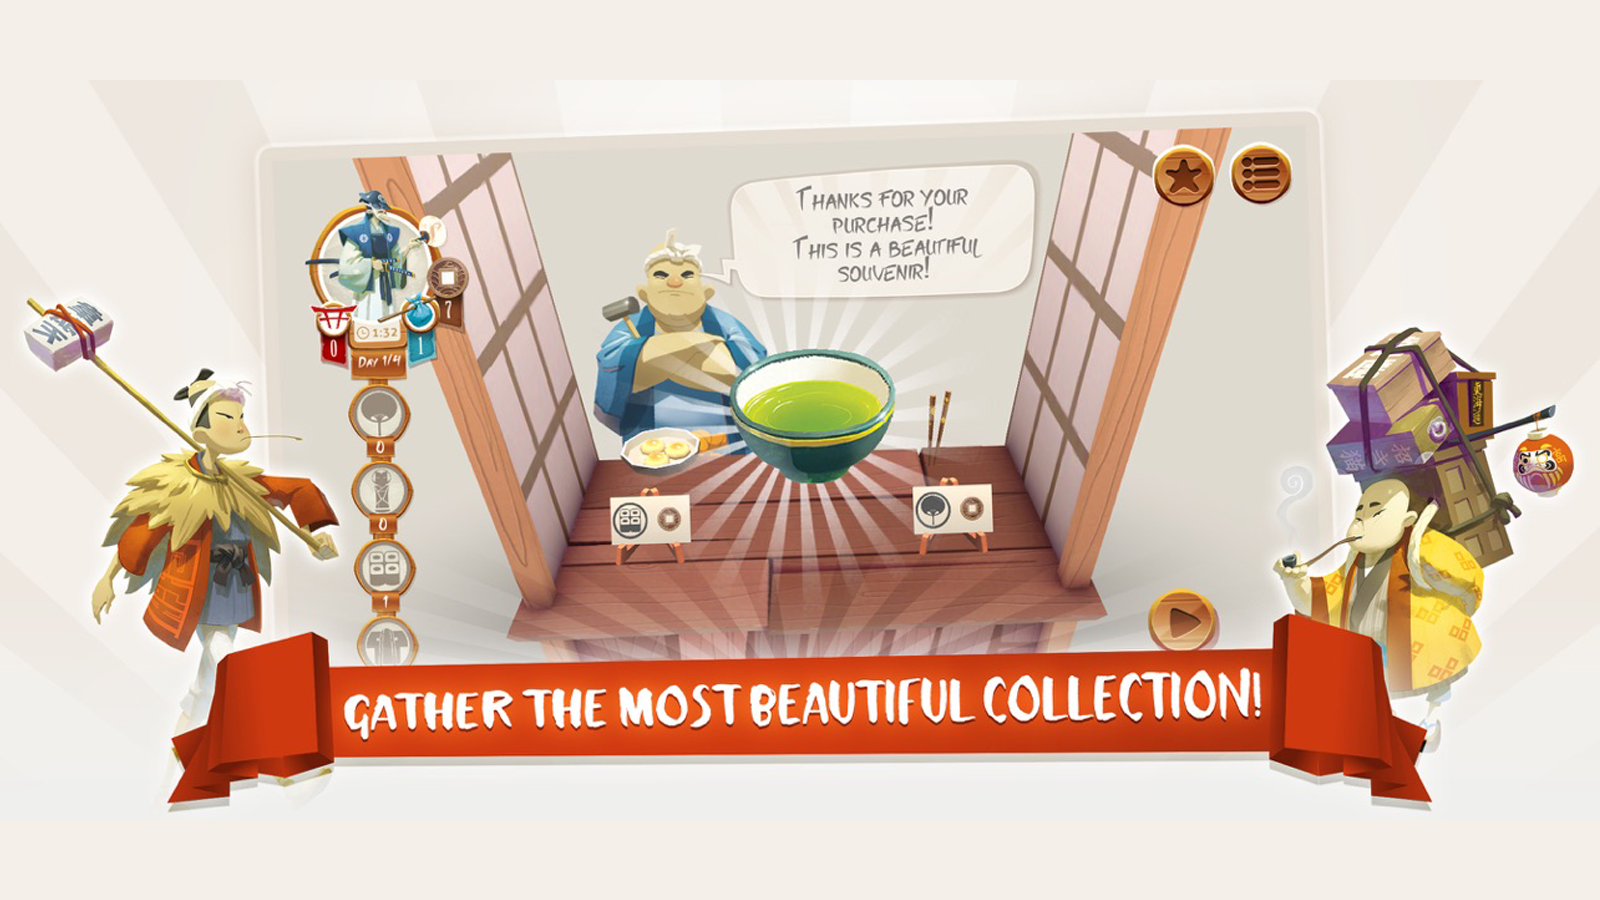 You'll gather a collection of artifacts and artwork during Tokaido